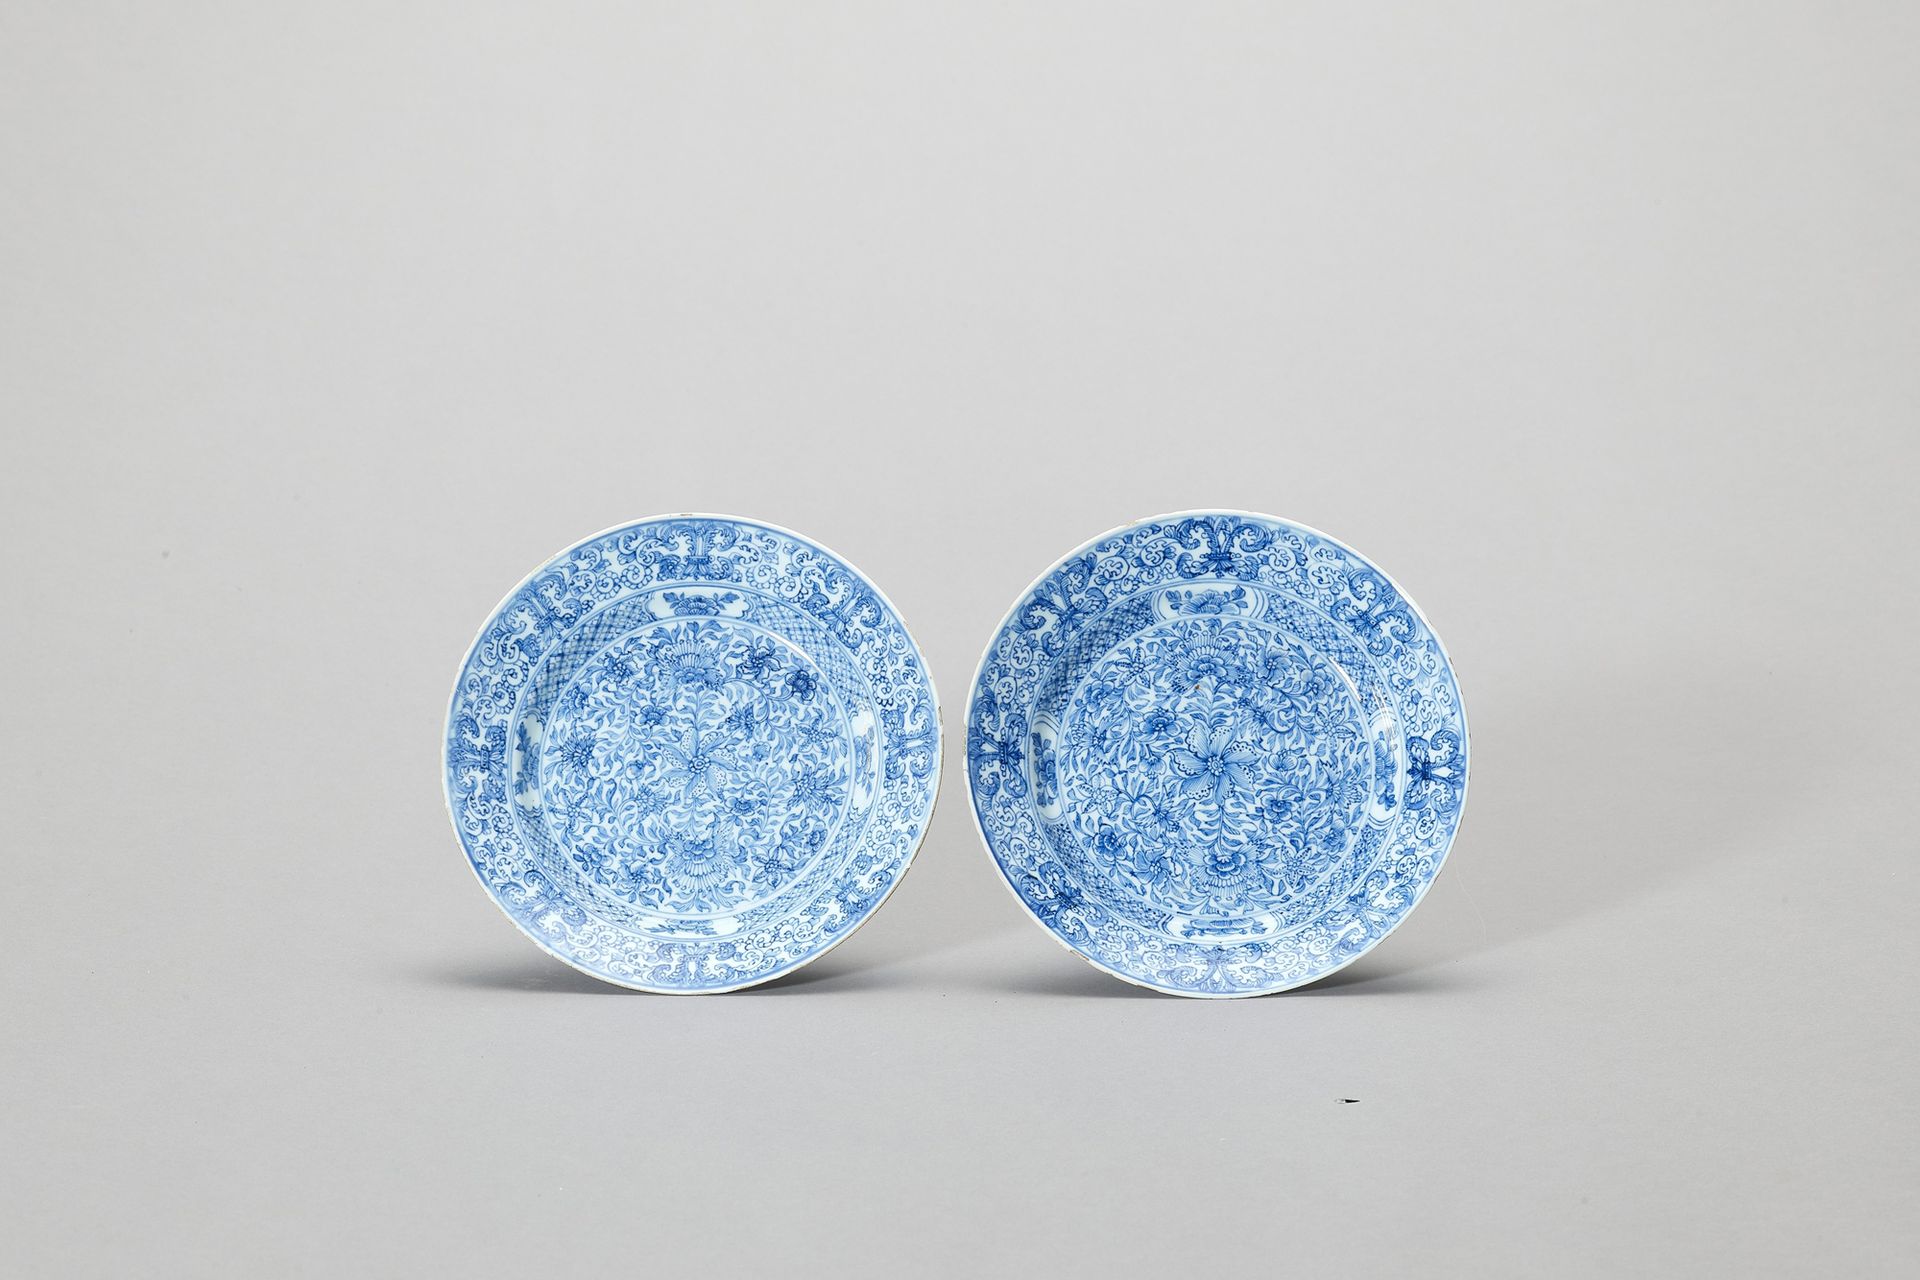 A PAIR OF ‘FLORAL SCROLL’ BLUE AND WHITE PORCELAIN DISHES 一对 "花卷 "蓝白瓷盘
中国，康熙时期（1&hellip;